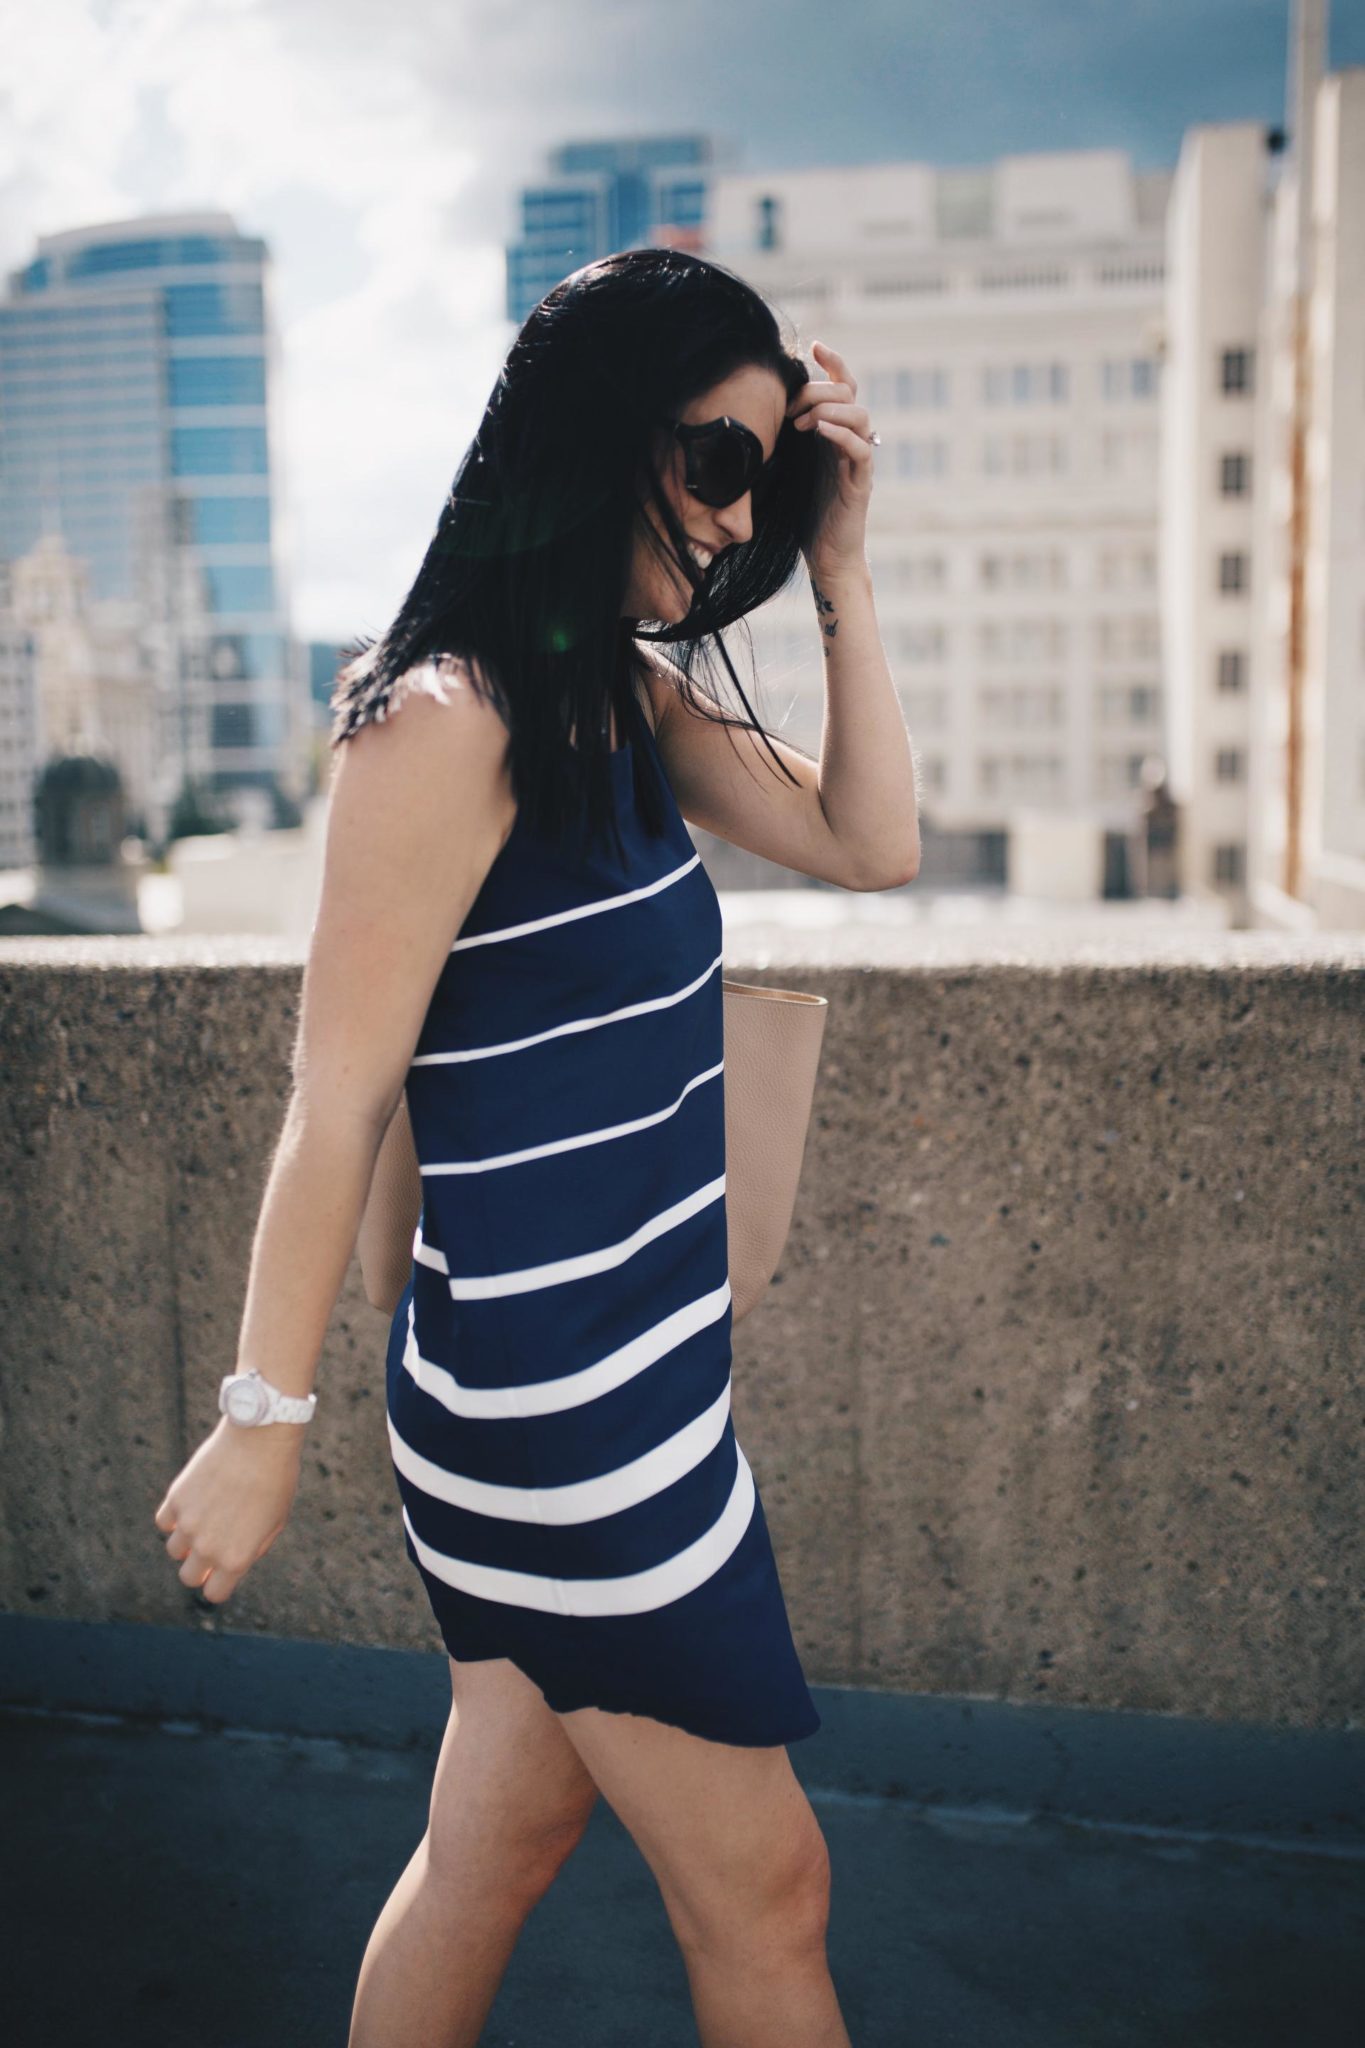 Striped Dress | summer fashion tips | summer outfit ideas | summer style tips | what to wear for summer | warm weather fashion | fashion for summer | style tips for summer | outfit ideas for summer || Dressed to Kill